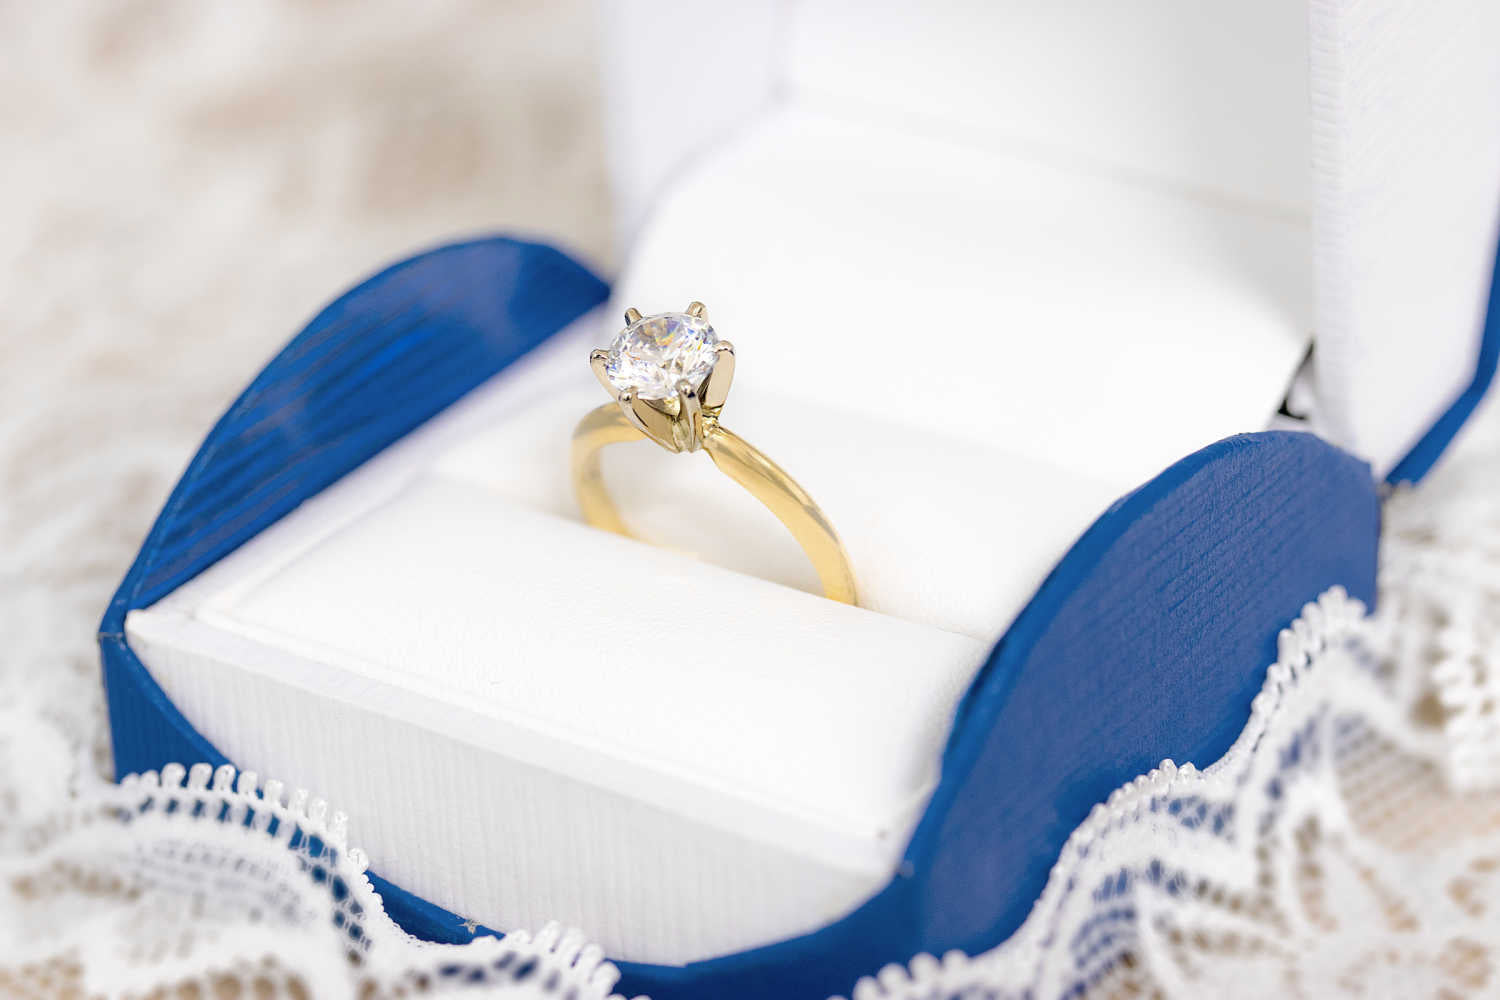 A yellow gold six prong solitaire engagement ring in a Fox Fine Jewelry box.